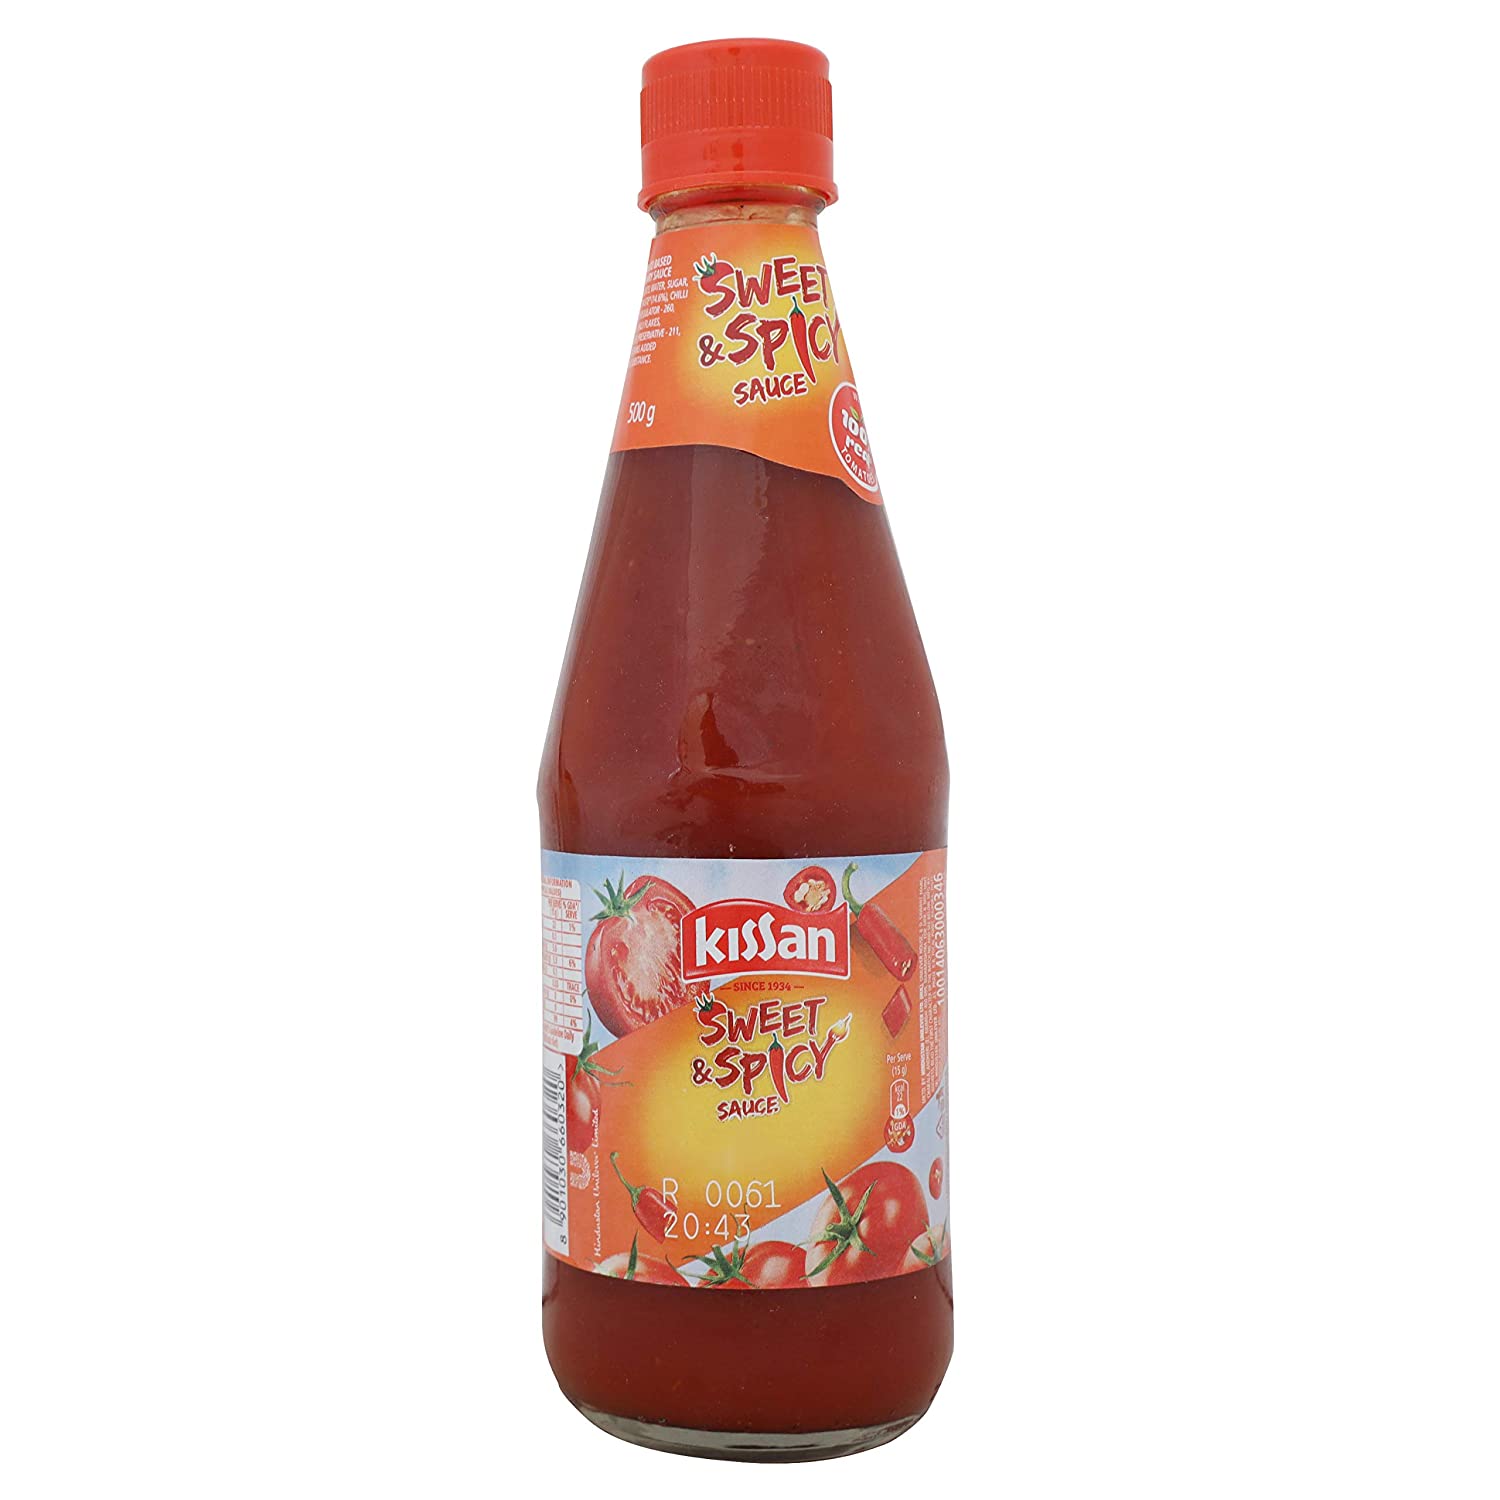 Kissan Sweet & Spicy Sauce Image